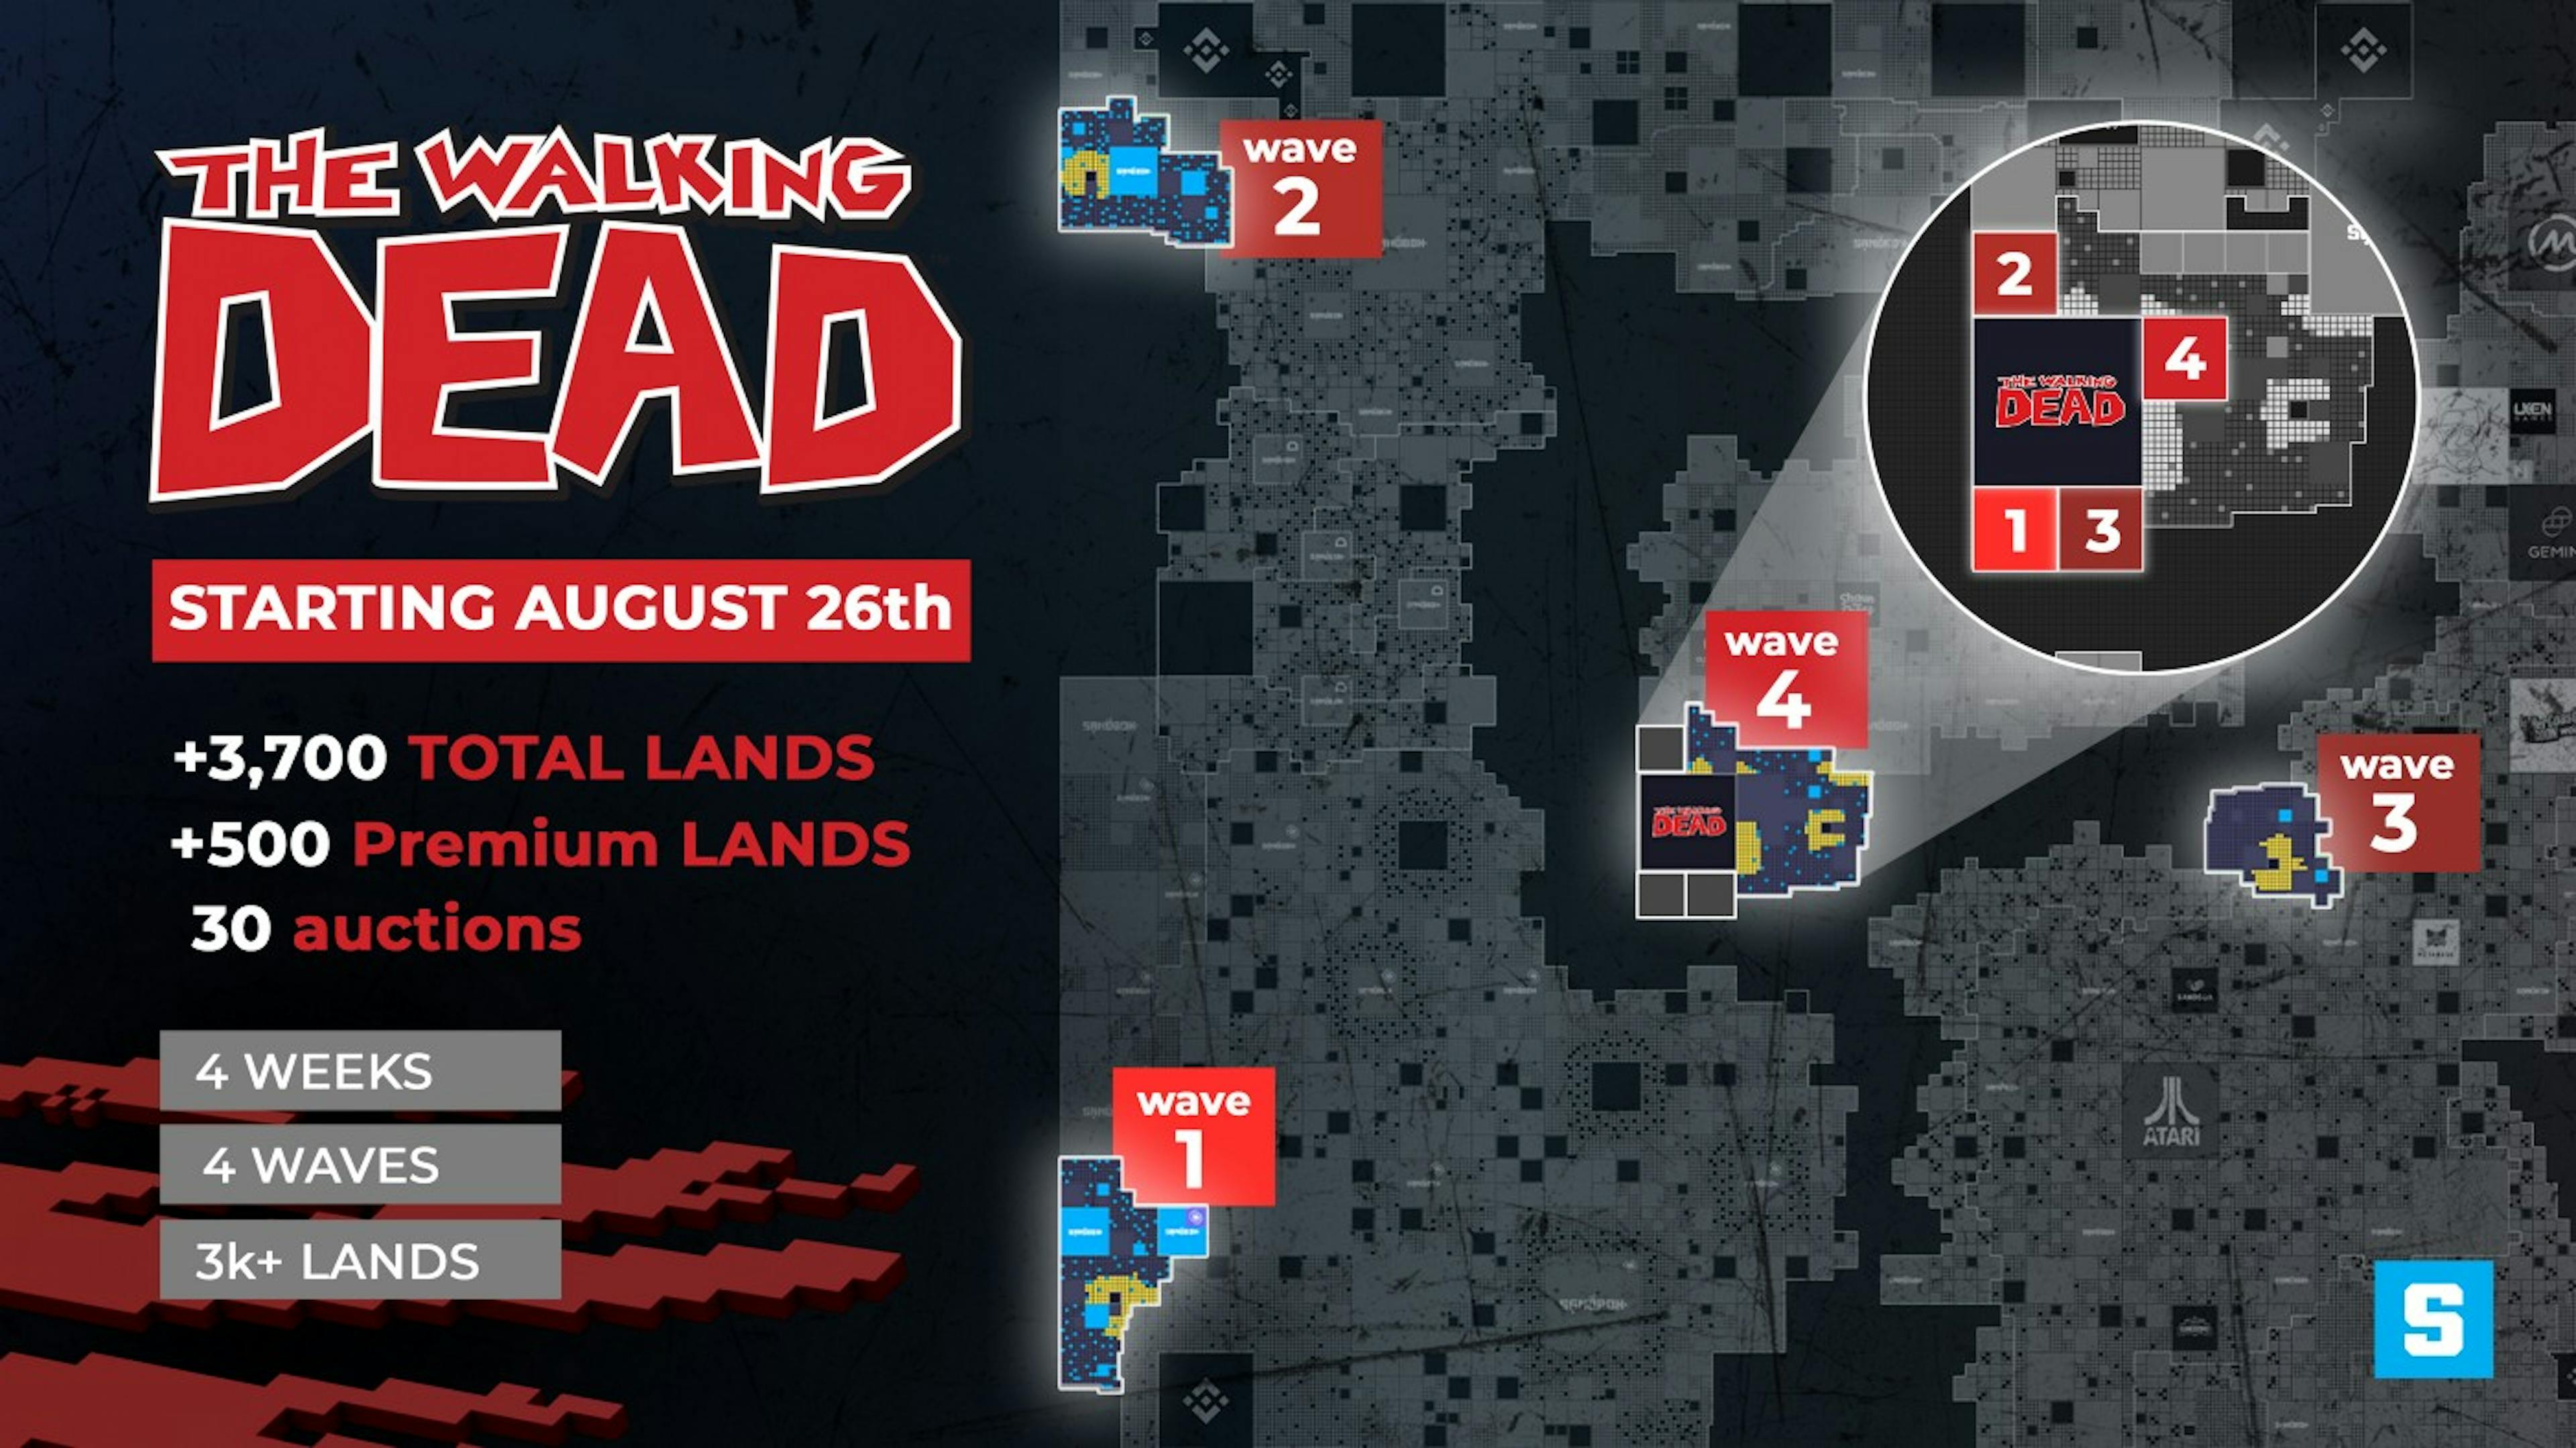 The Walking Dead's LAND sale will be in 4 waves | Image credit: The Sandbox